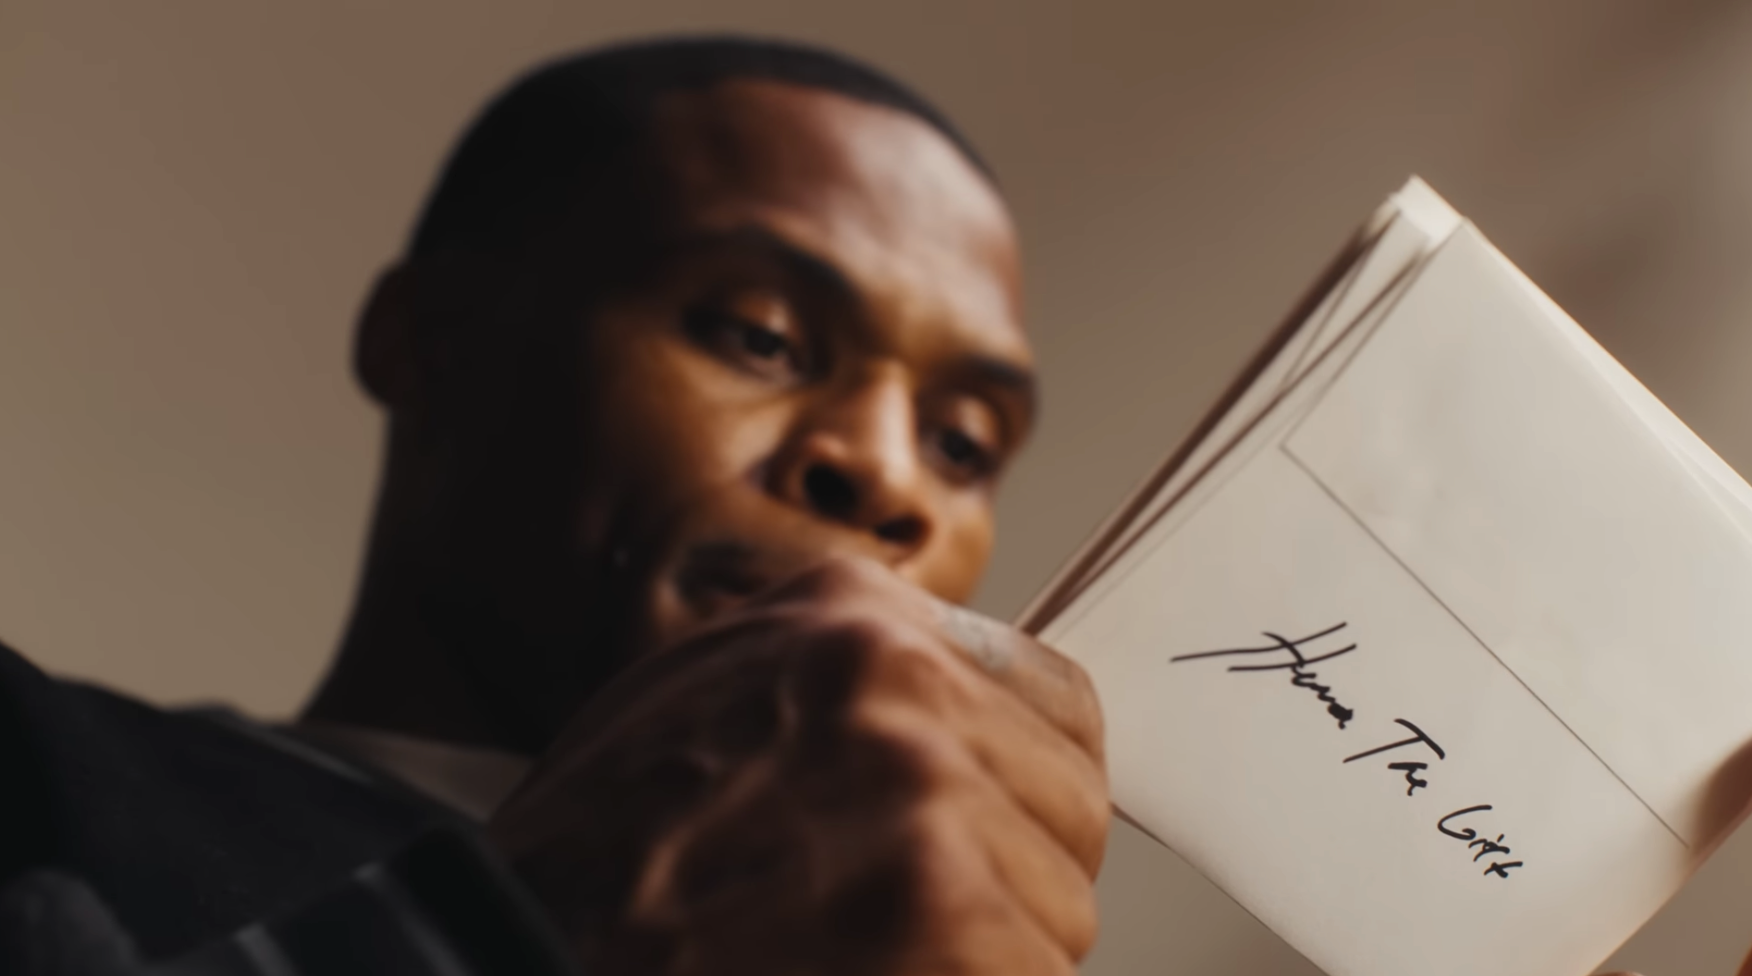 Learn the Behind-the-Scenes VFX Secrets of this Russell Westbrook Short